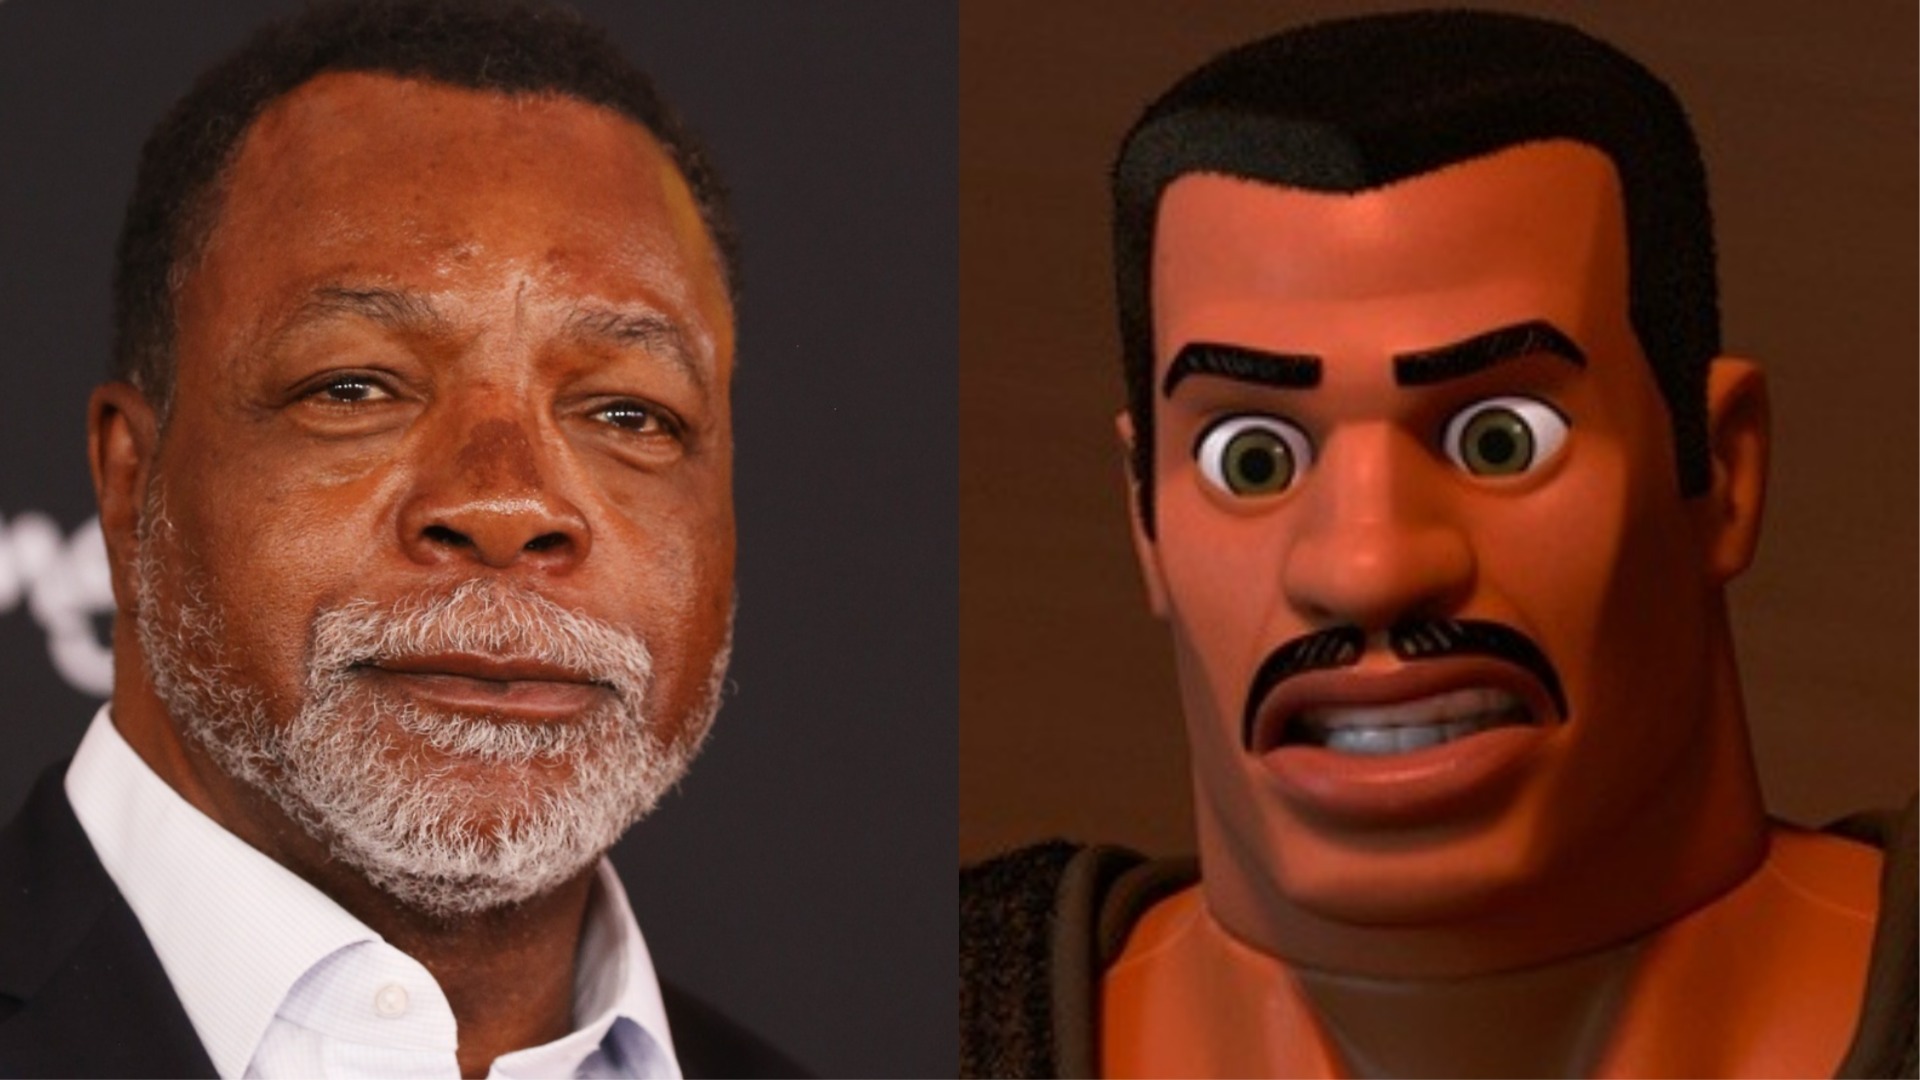 Carl-Weathers-Voices-Combat-Carl-in-Toy-Story-4